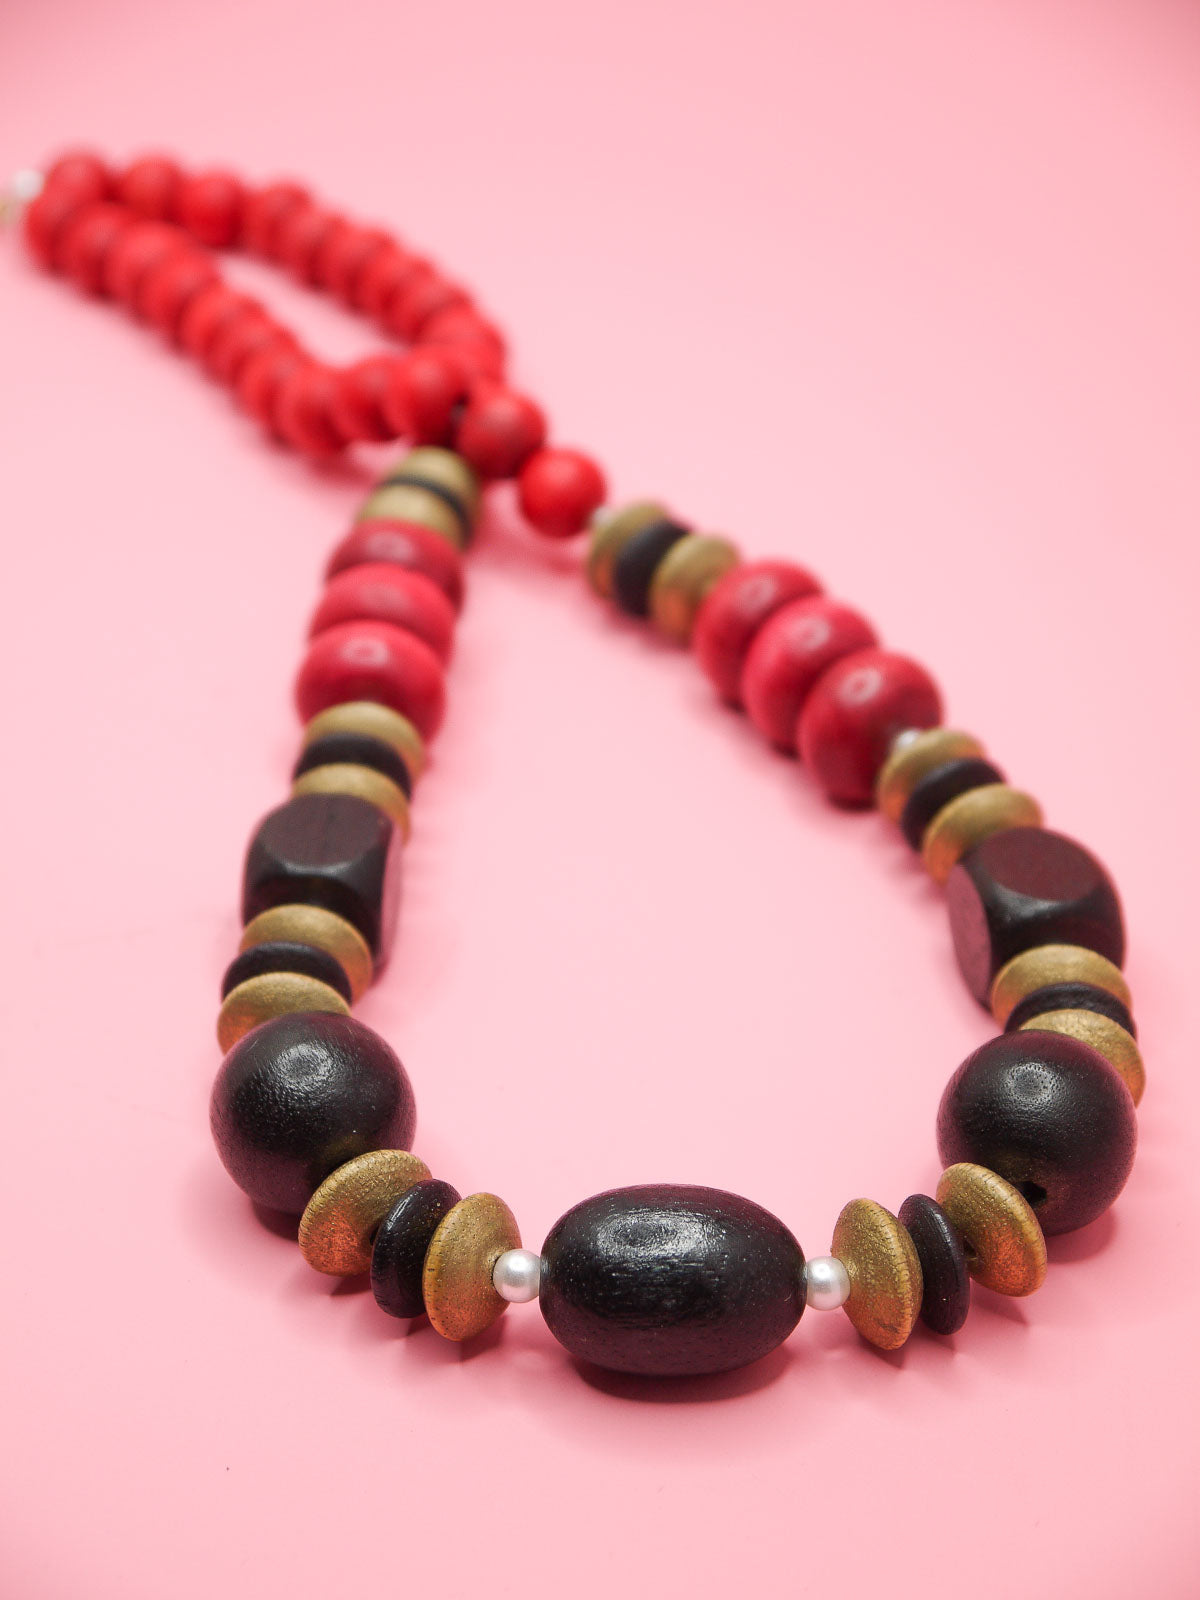 Buy Red Black Wooden Bead Necklace for Women, Big Chunky Wood Bead Necklace,  Large Statement Beaded Bib Necklace, Natural Handmade Jewelry Online in  India - Etsy